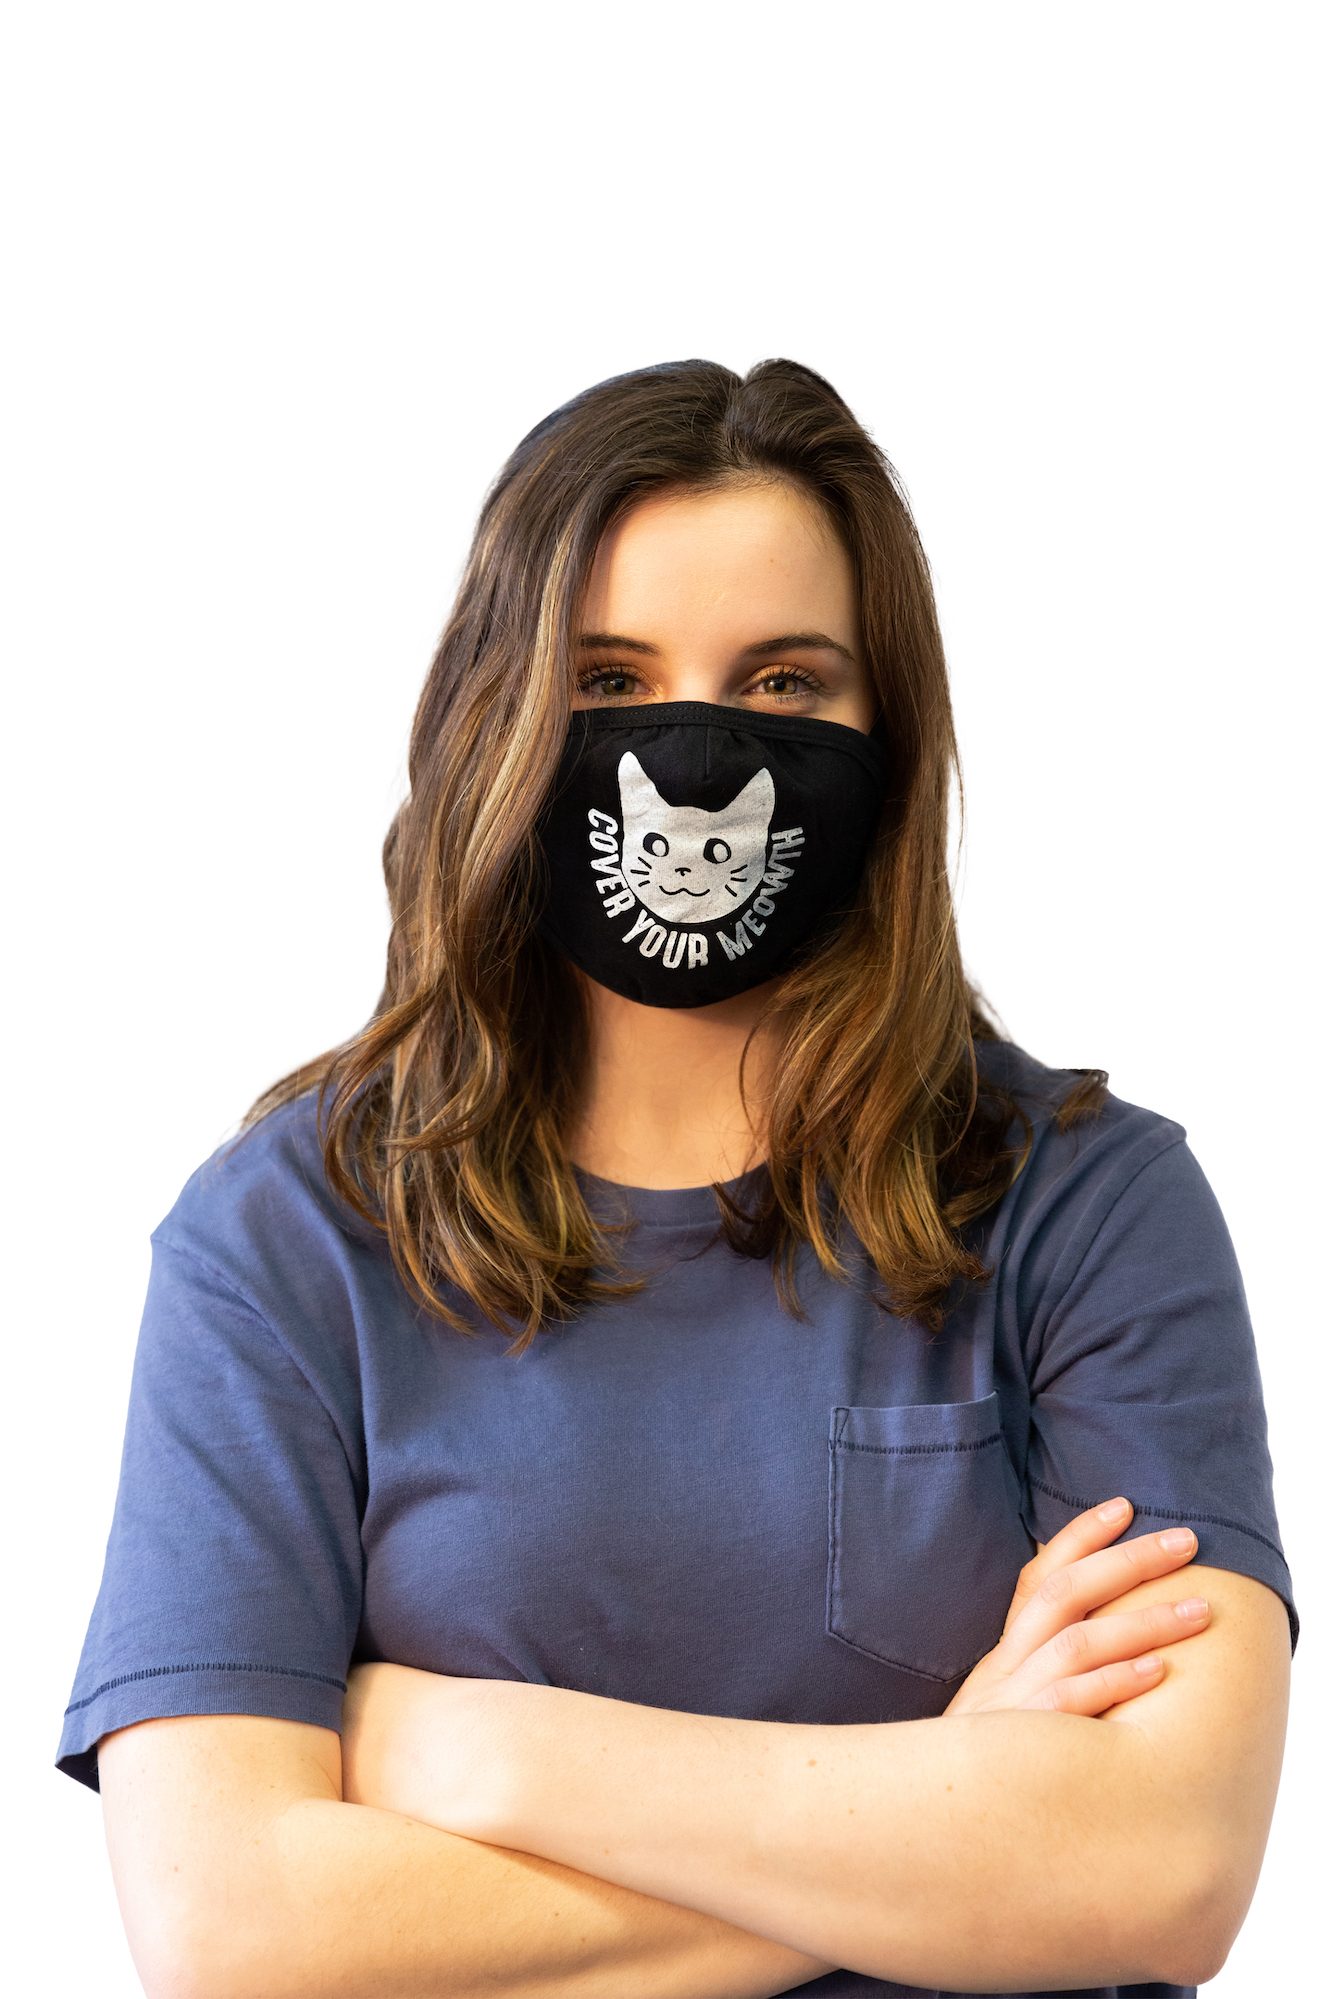 Cover Your Meow Face Mask Funny Crazy Cat Lady Graphic Novelty Nose And Mouth Covering - image 2 of 7